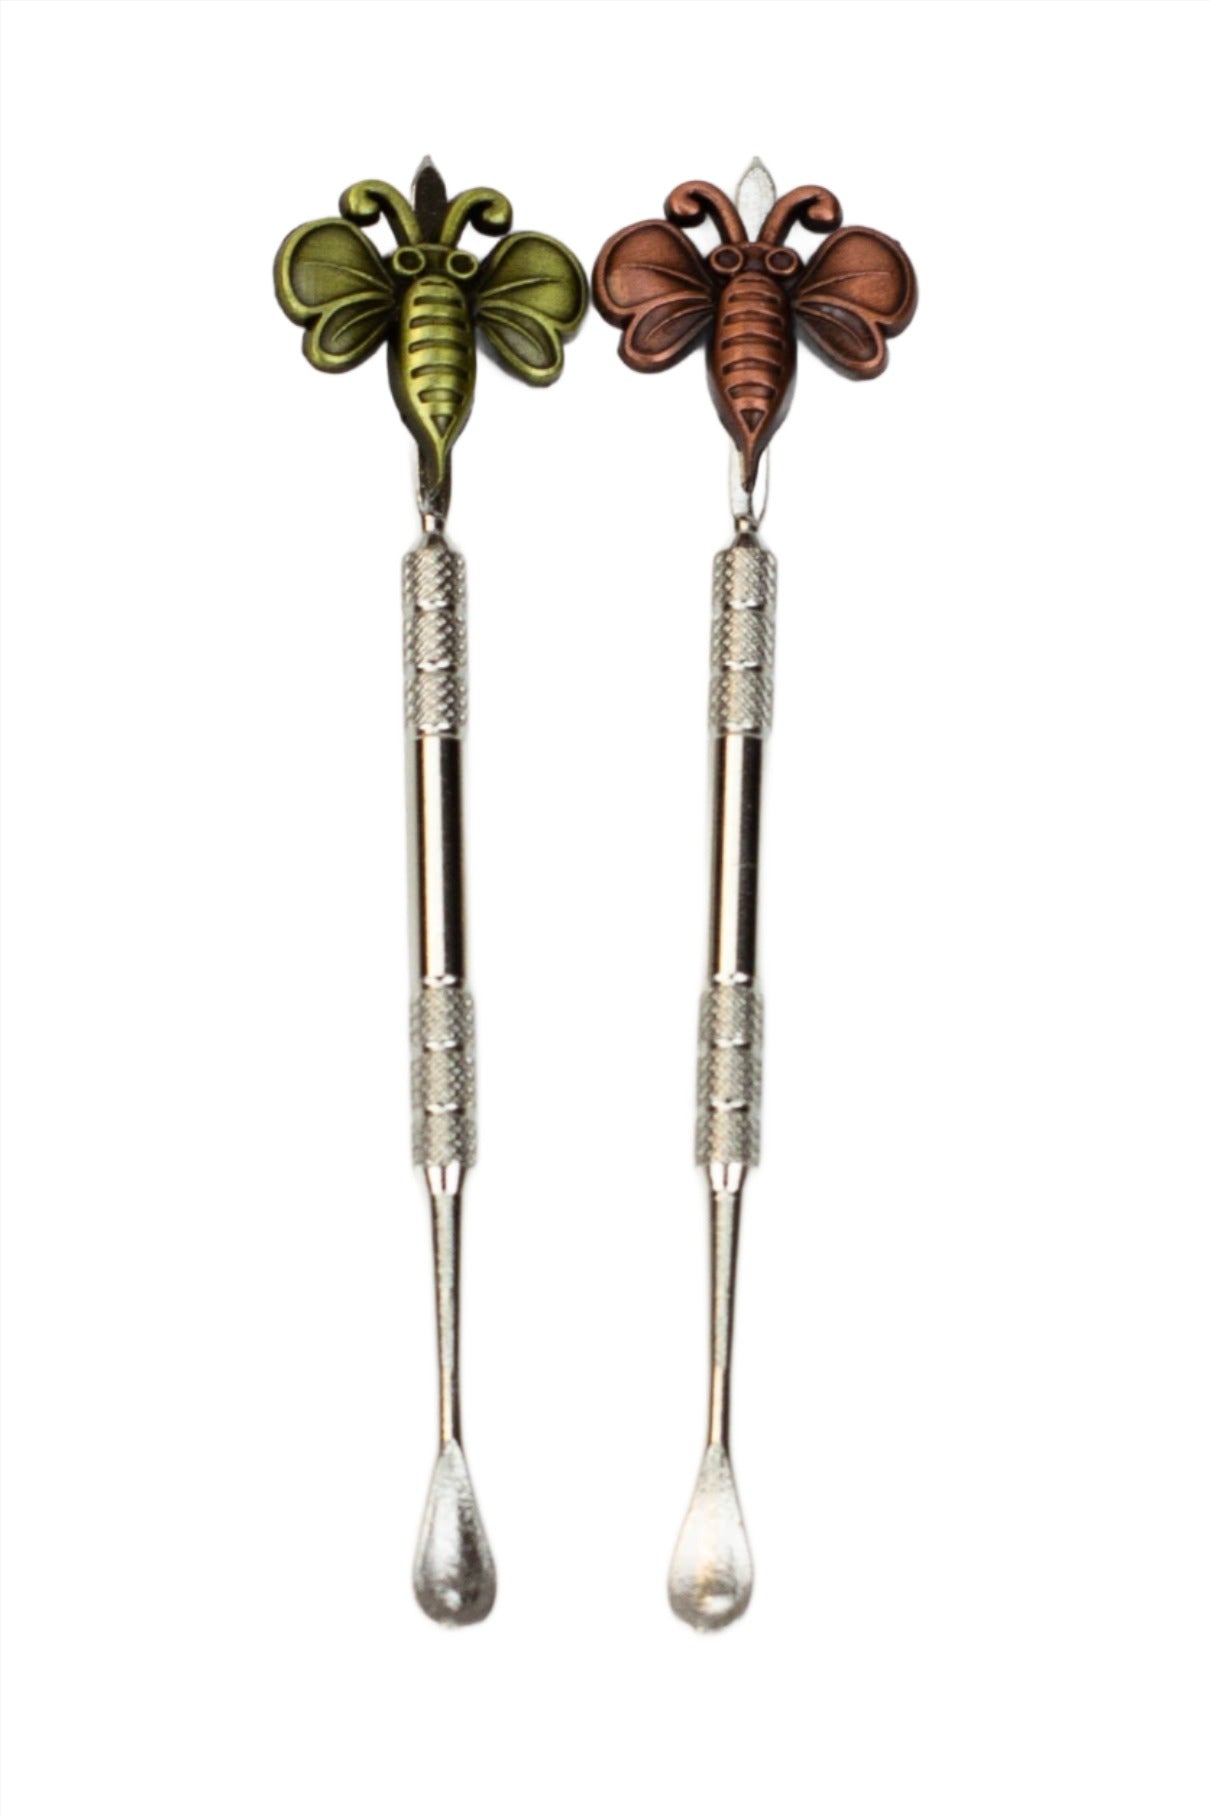 Bumble Bee Metal Dabber - Glasss Station